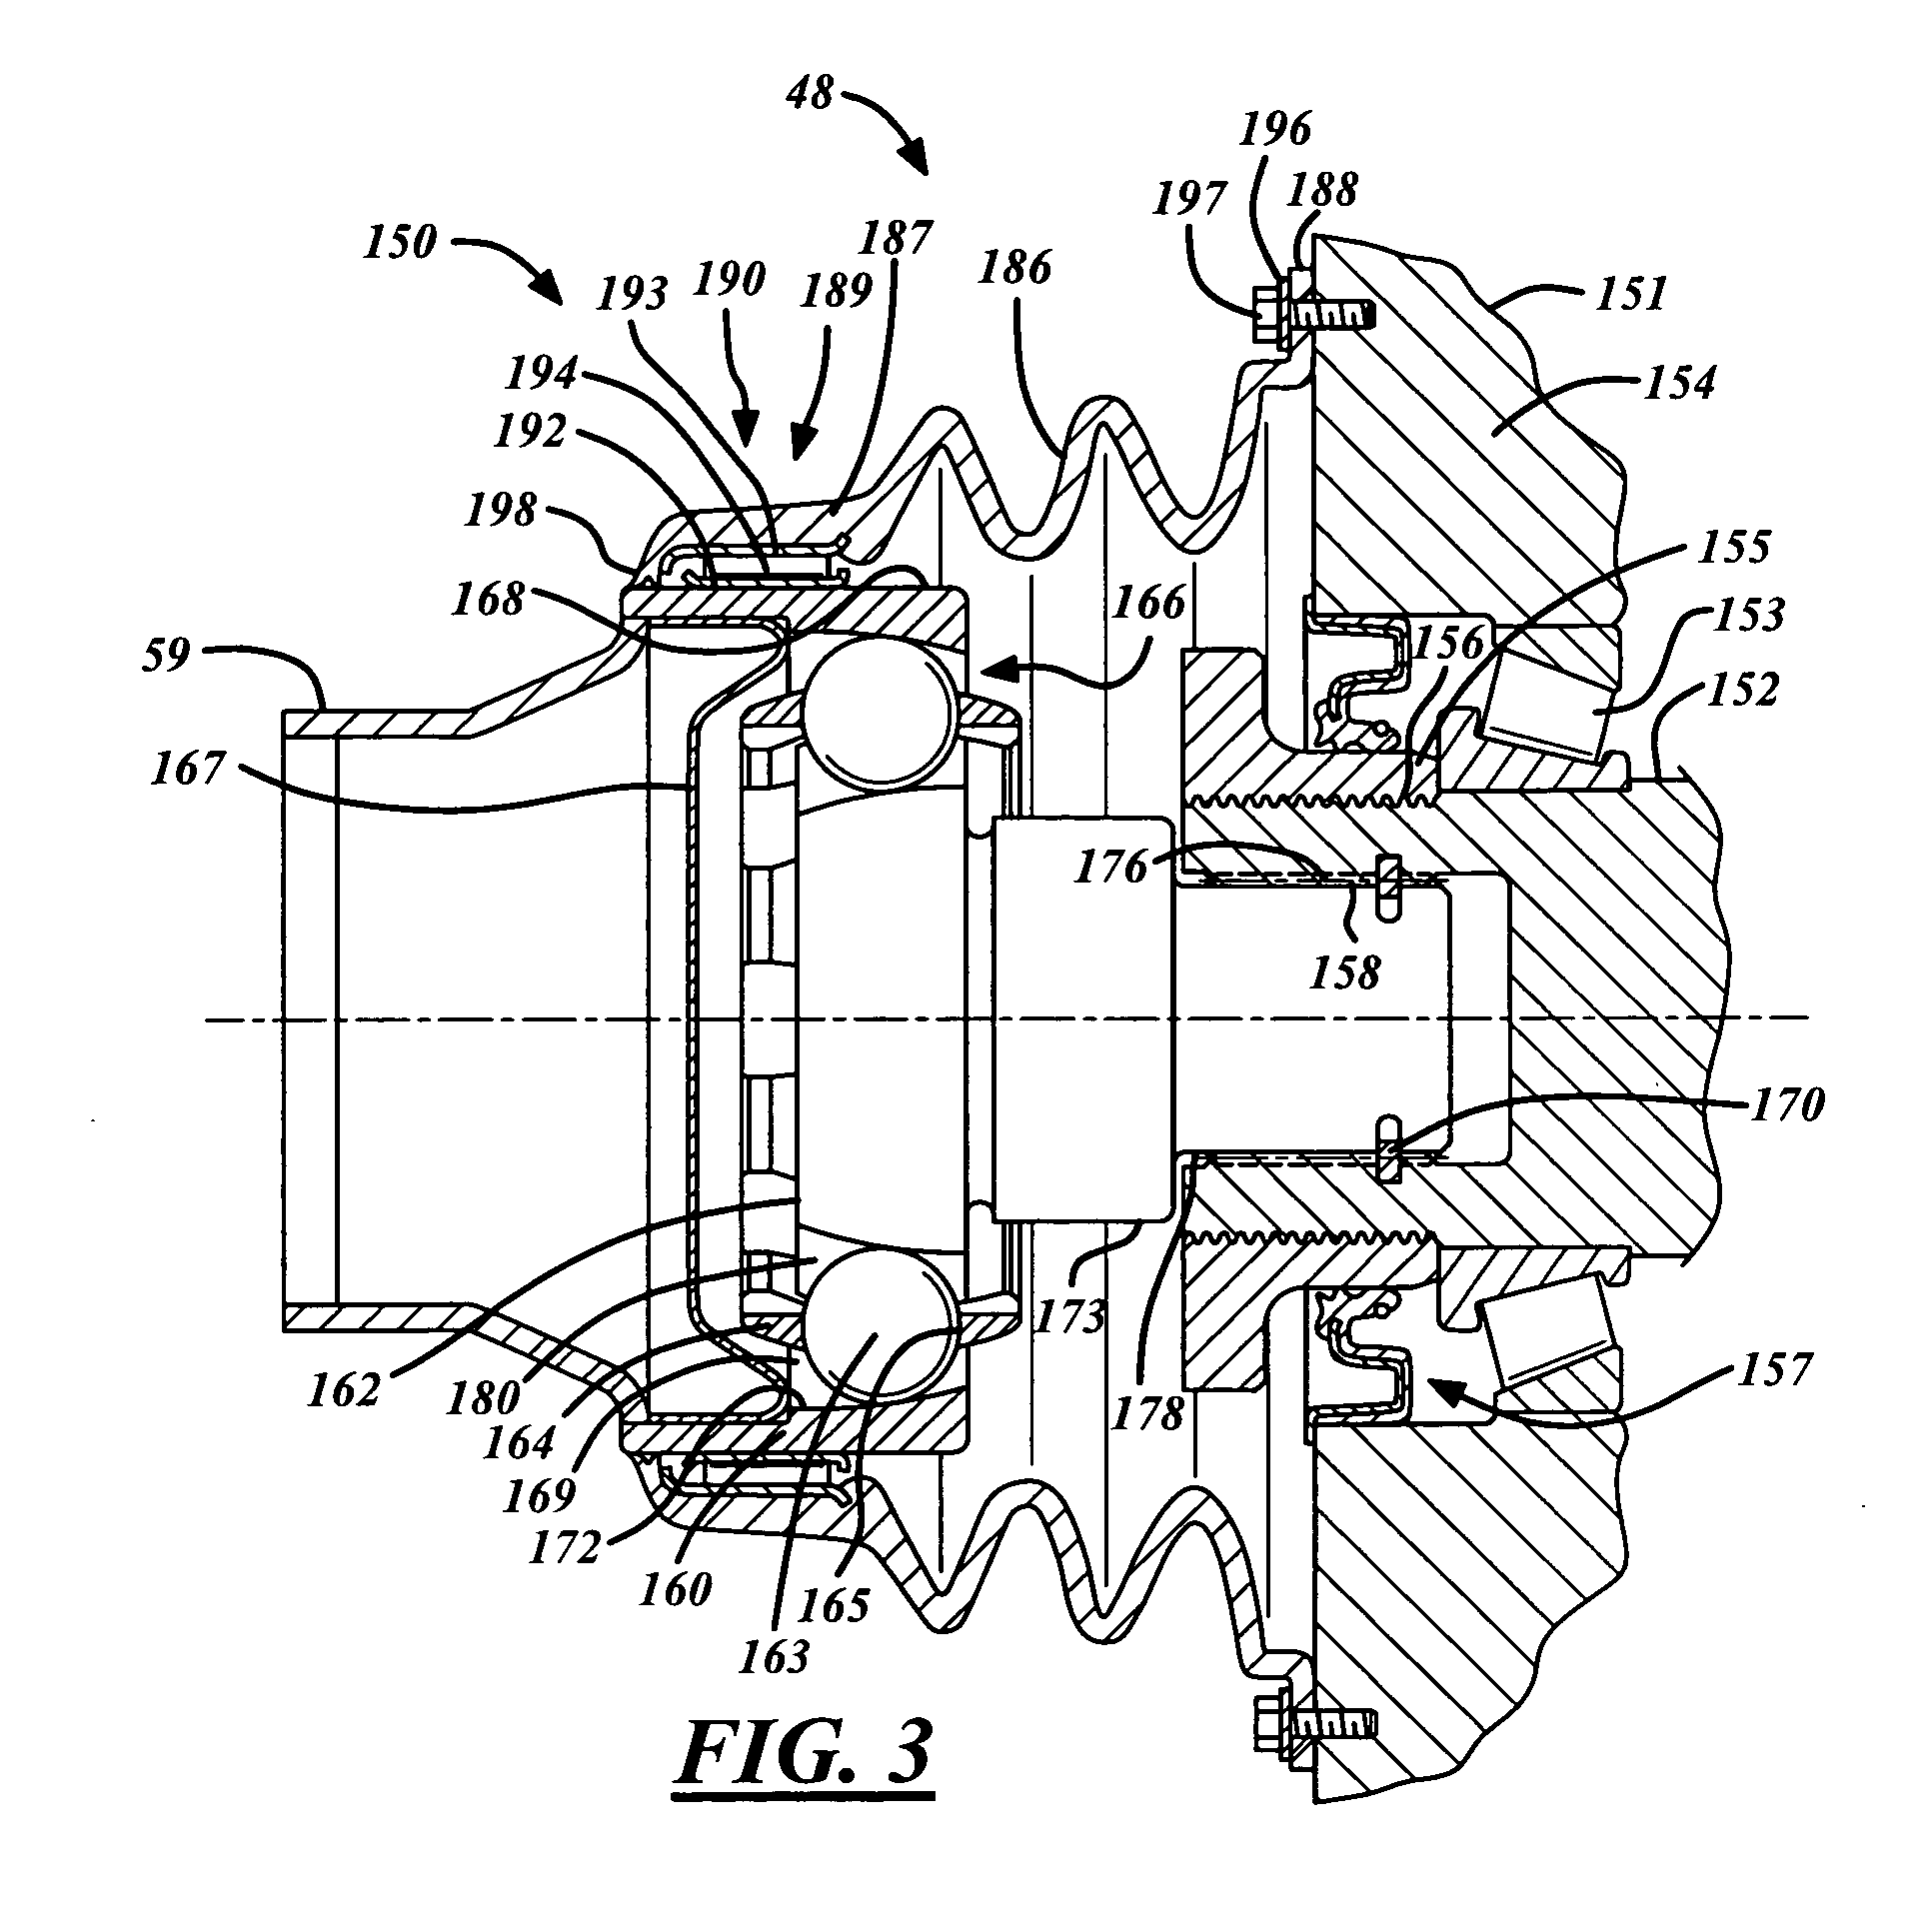 Direct torque flow constant velocity joint having a non-rotating boot